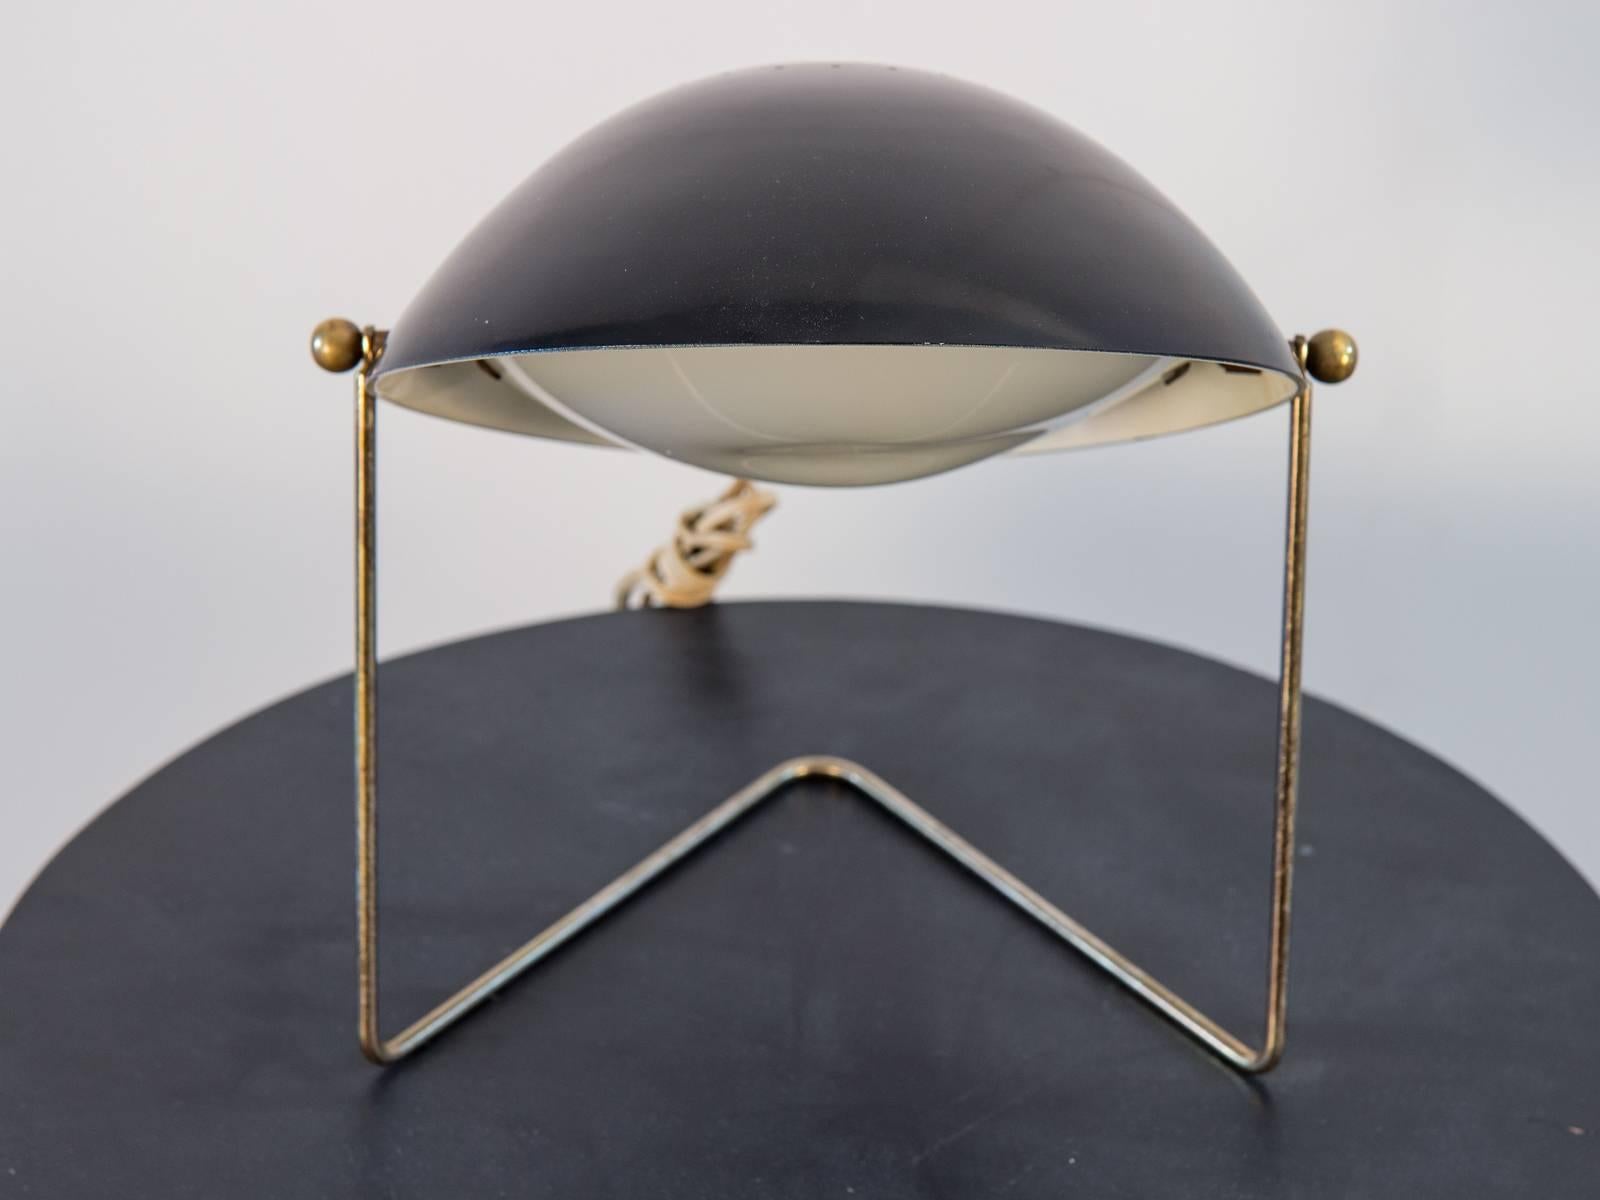 Lamp designed by Gerald Thurston for Lightolier in the 1950s. The black shade tilts and the lamps can also be hung on the wall as a sconce. A diffuser keeps the light gentle. Black painted metal shade and brass frame. In very good vintage